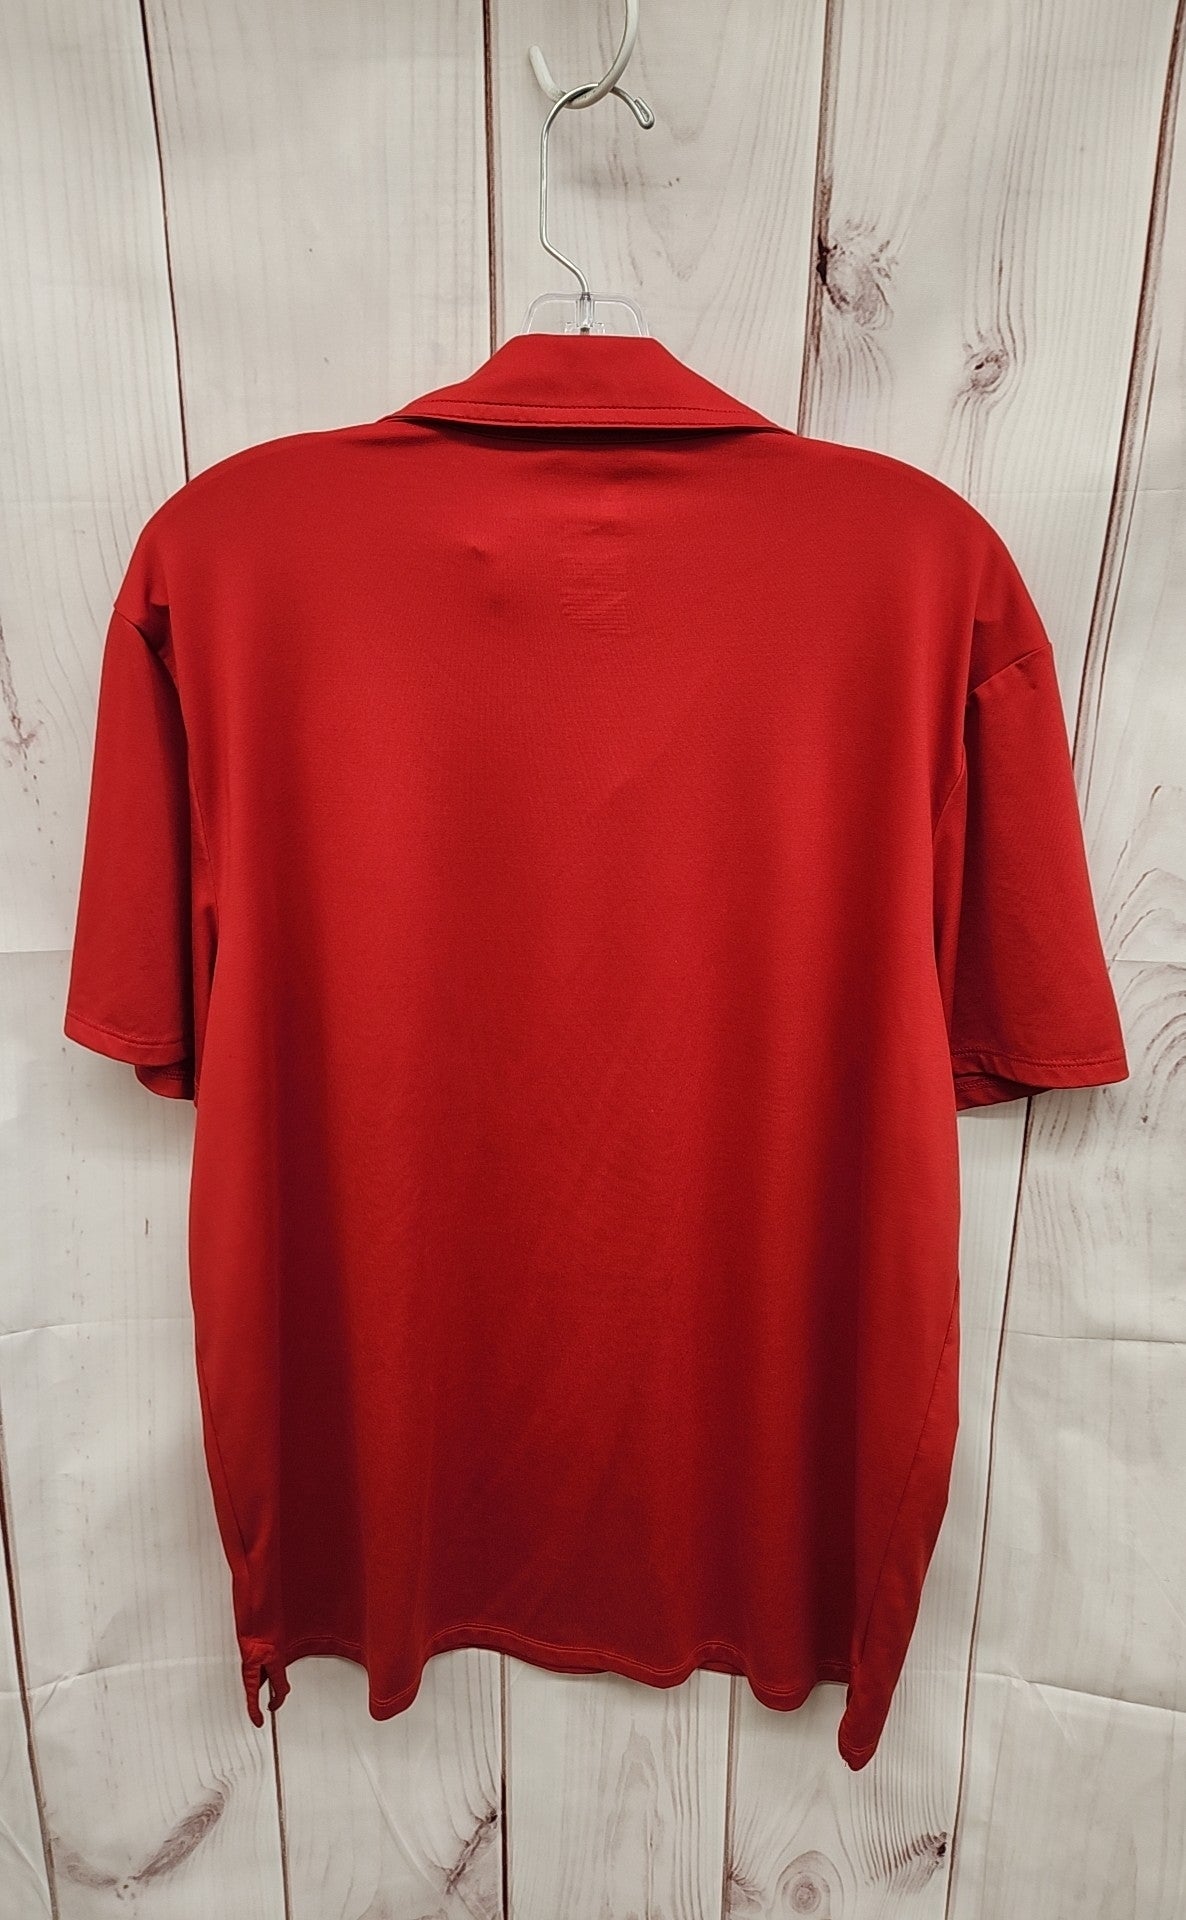 All in Motion Men's Size L Red Shirt